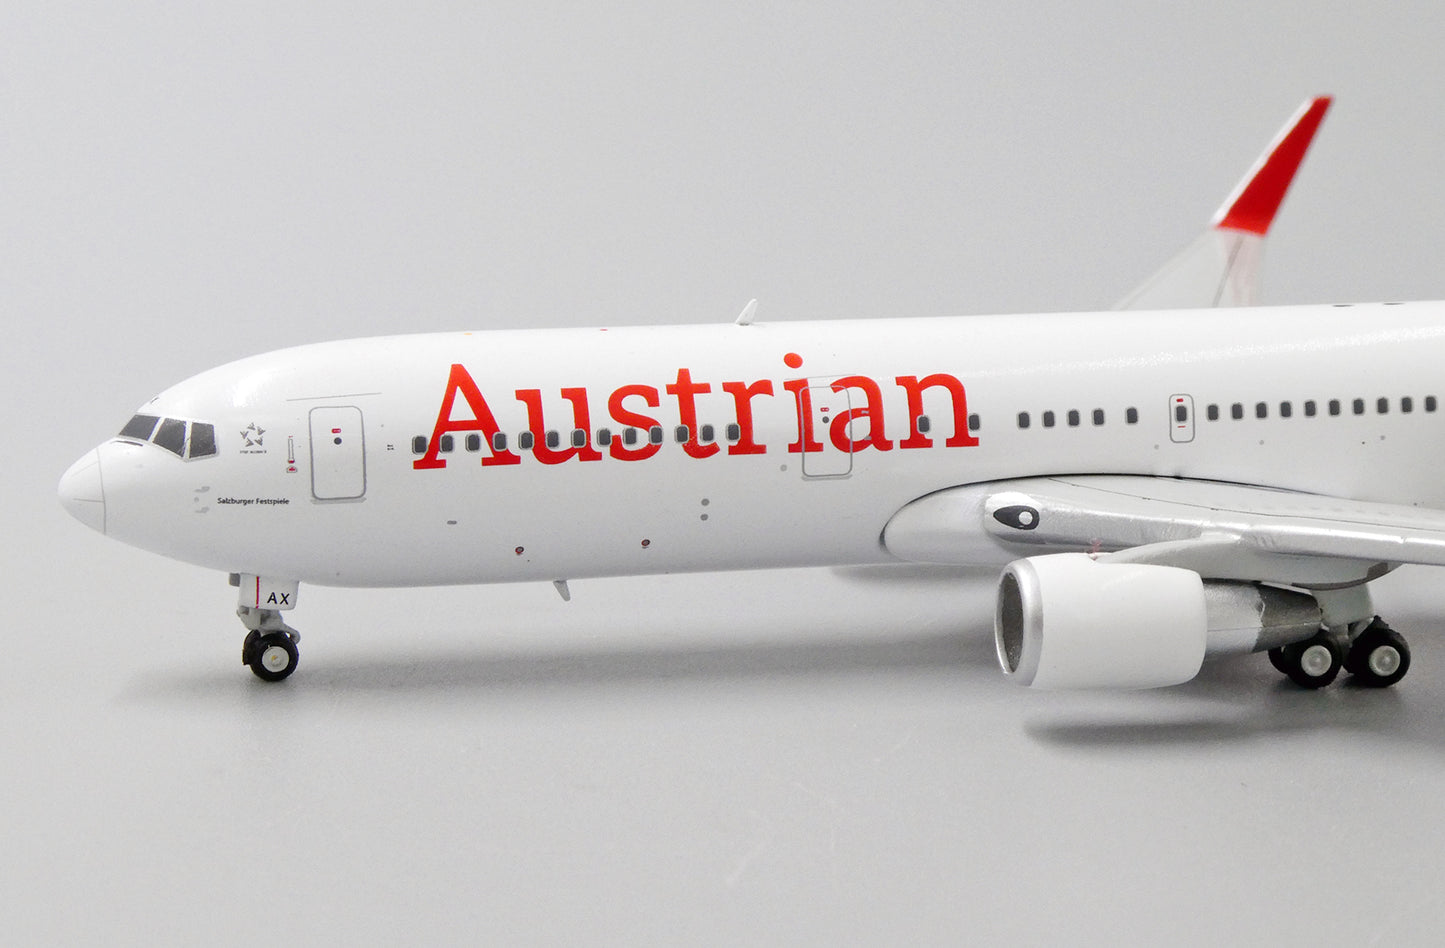 1:400 JC Wings Austrian Airlines Boeing 767-300ER "New Colors" OE-LAX XX4171